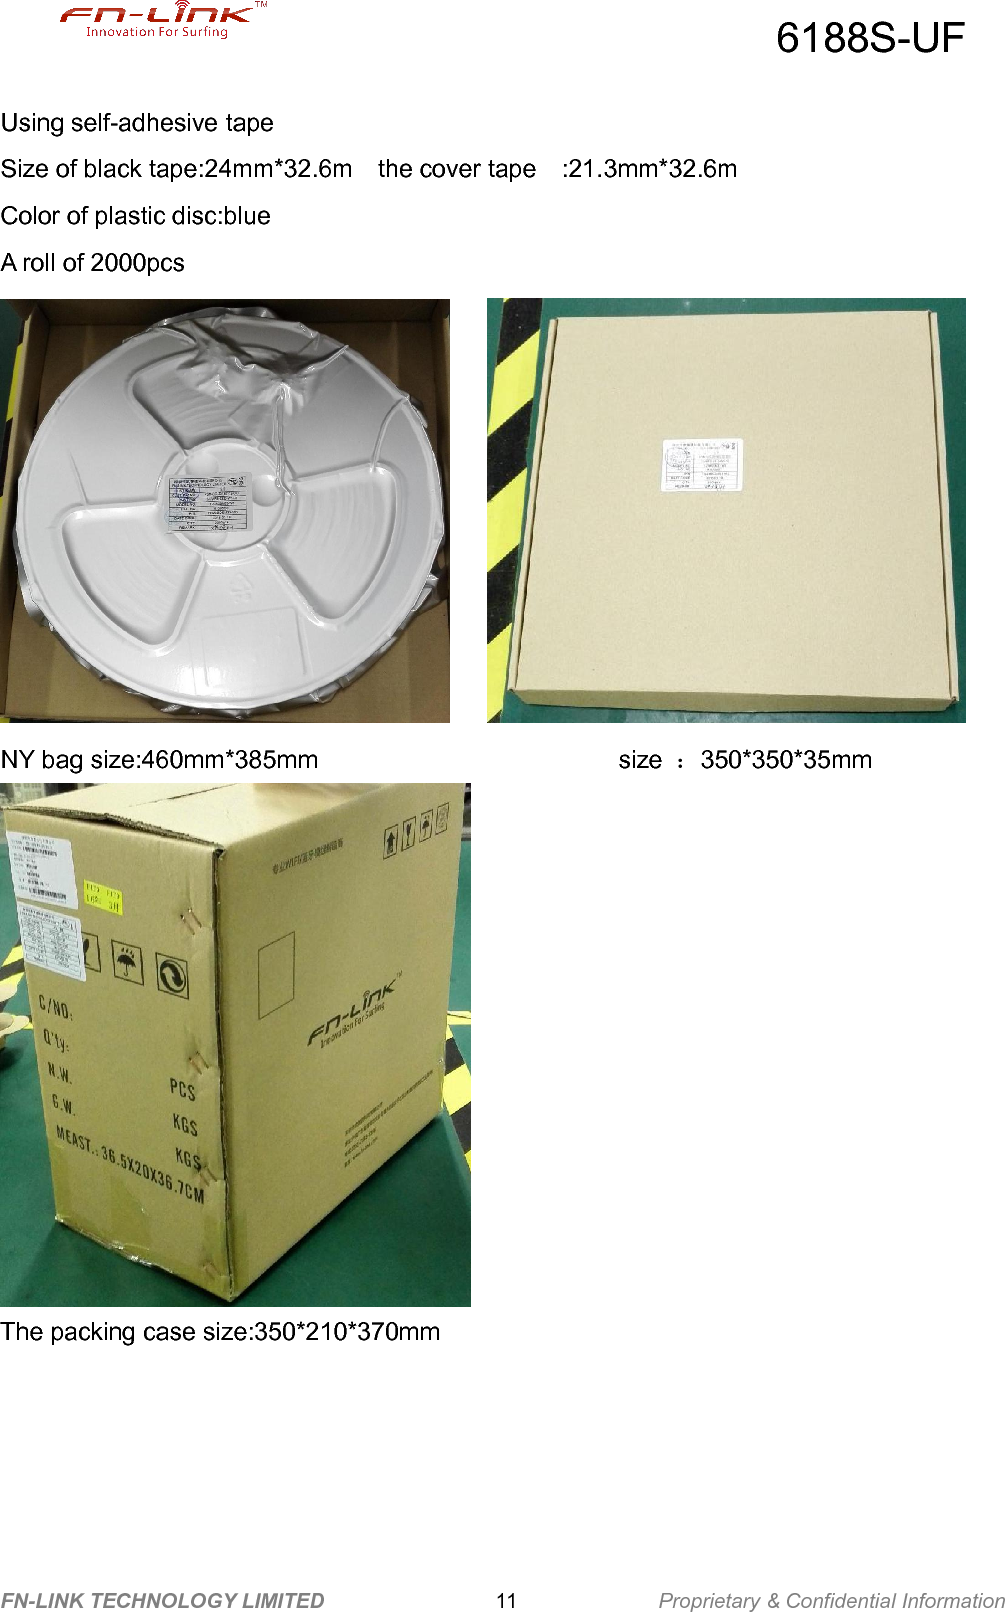 6188S-UFFN-LINK TECHNOLOGY LIMITED Proprietary &amp; Confidential Information11Using self-adhesive tapeSize of black tape:24mm*32.6m the cover tape :21.3mm*32.6mColor of plastic disc:blueA roll of 2000pcsNY bag size:460mm*385mm size ：350*350*35mmThe packing case size:350*210*370mm